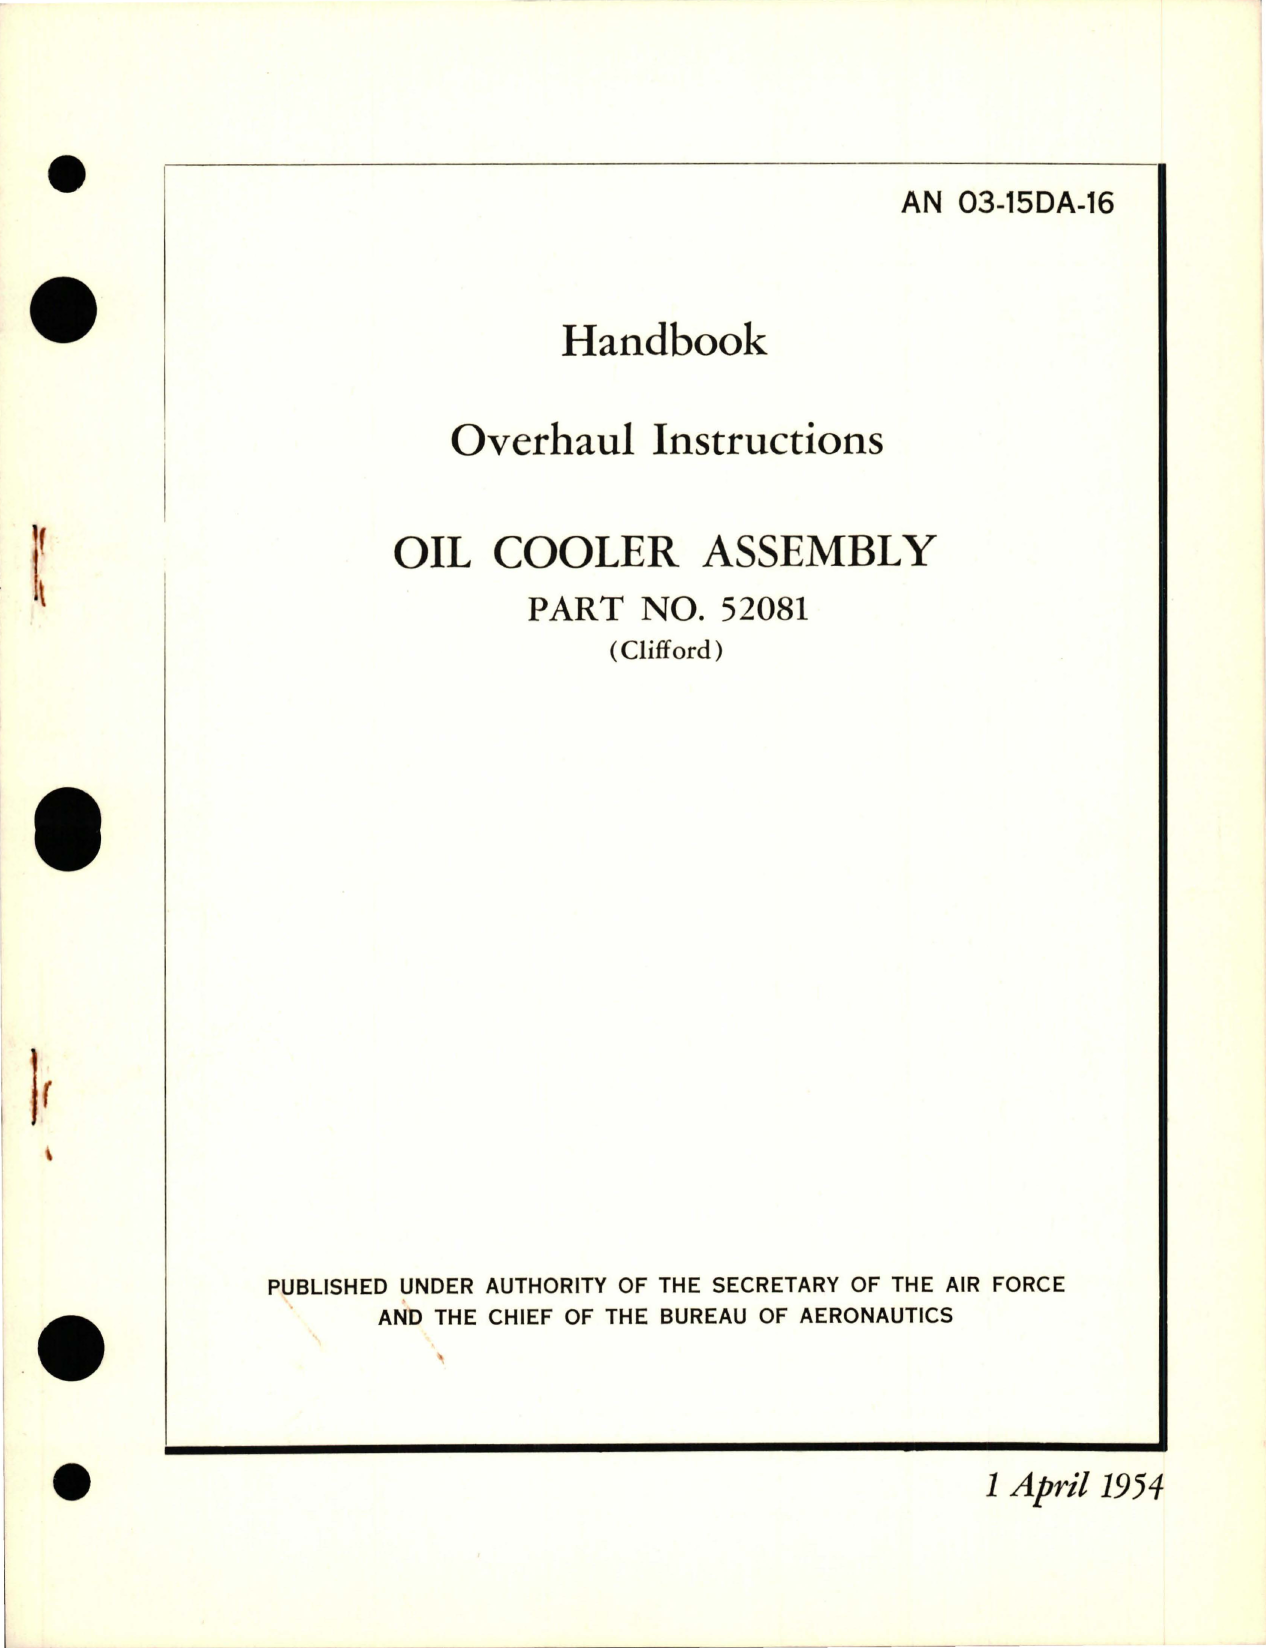 Sample page 1 from AirCorps Library document: Overhaul Instructions for Oil Cooler Assembly - Part 52081